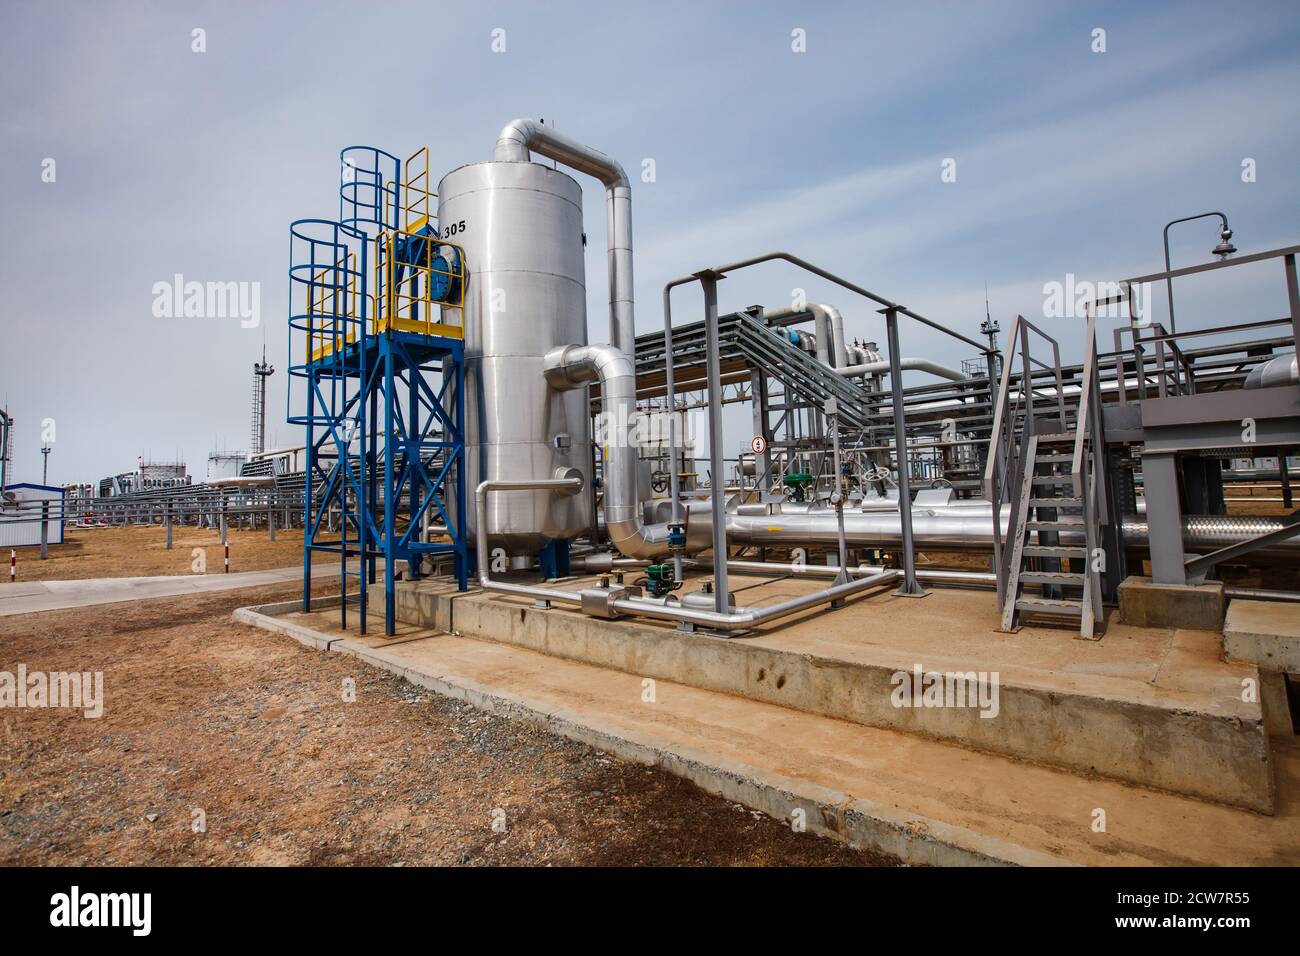 Refinery equipment, pipes, pipelines. Oil refinery and gas processing plant. Zhaik-Munai oil deposit, Kazakhstan. Stock Photo